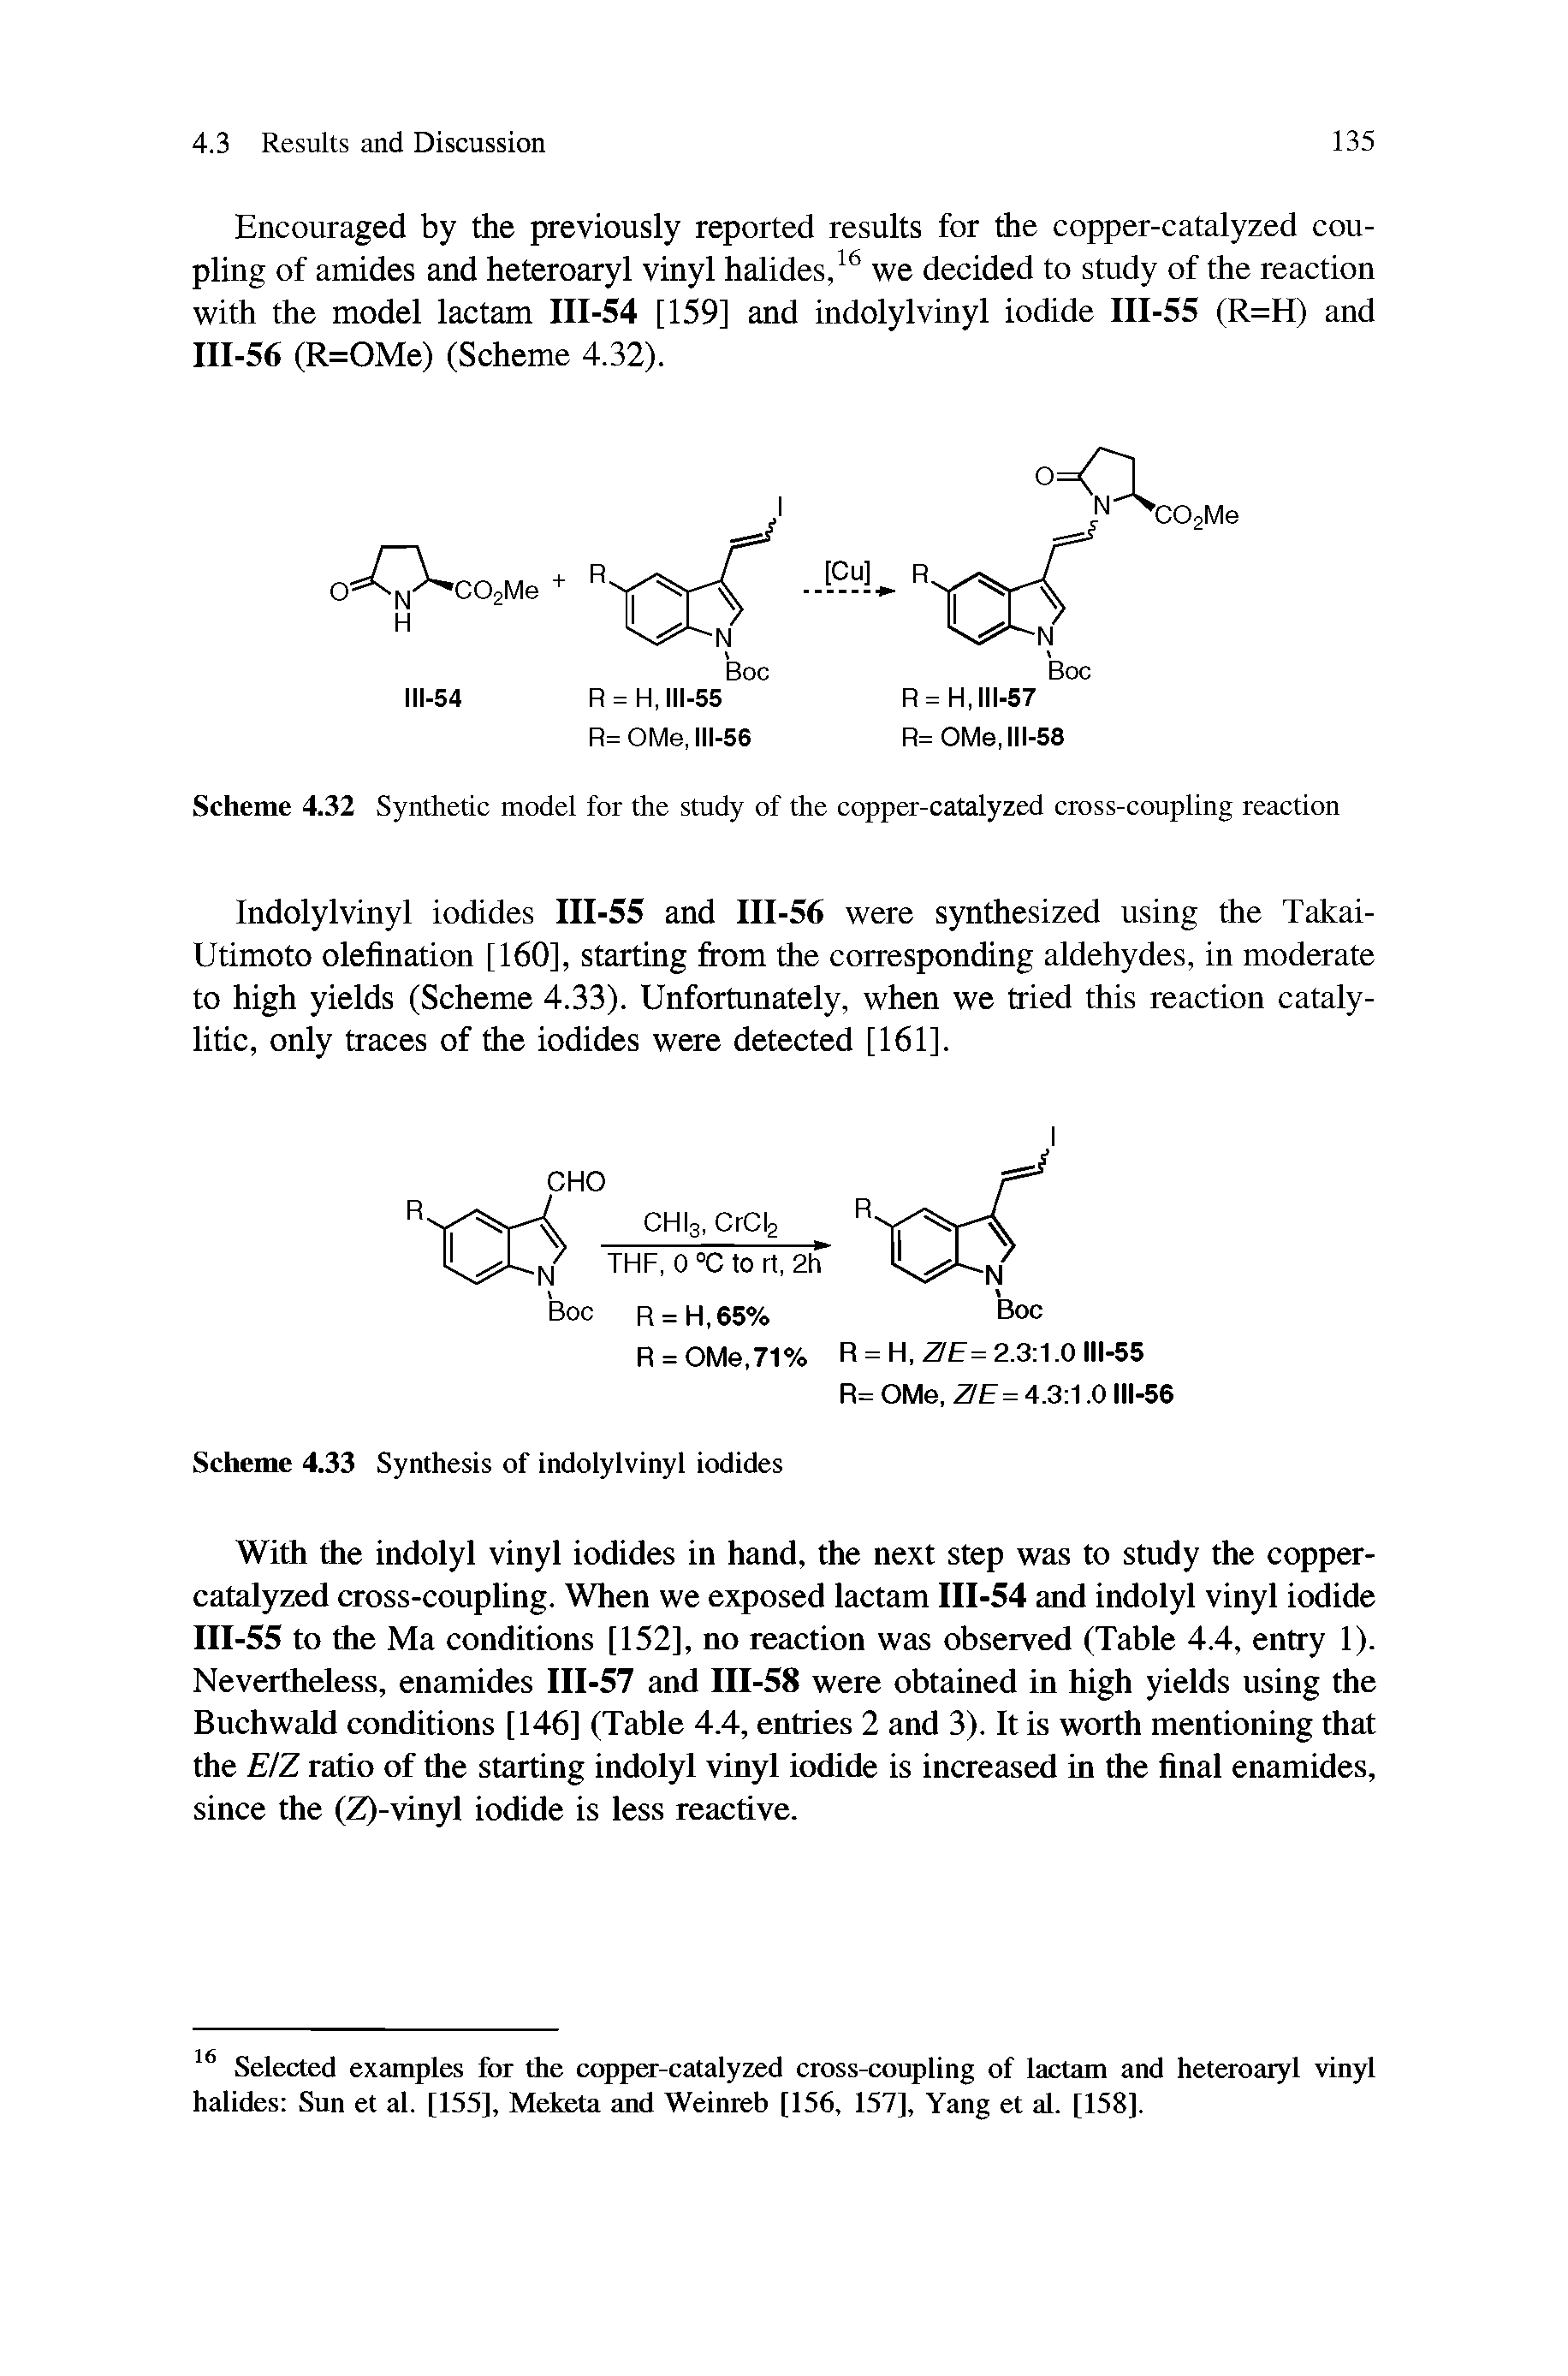 Scheme 4.32 Synthetic model for the study of the copper-catalyzed cross-coupling reaction...